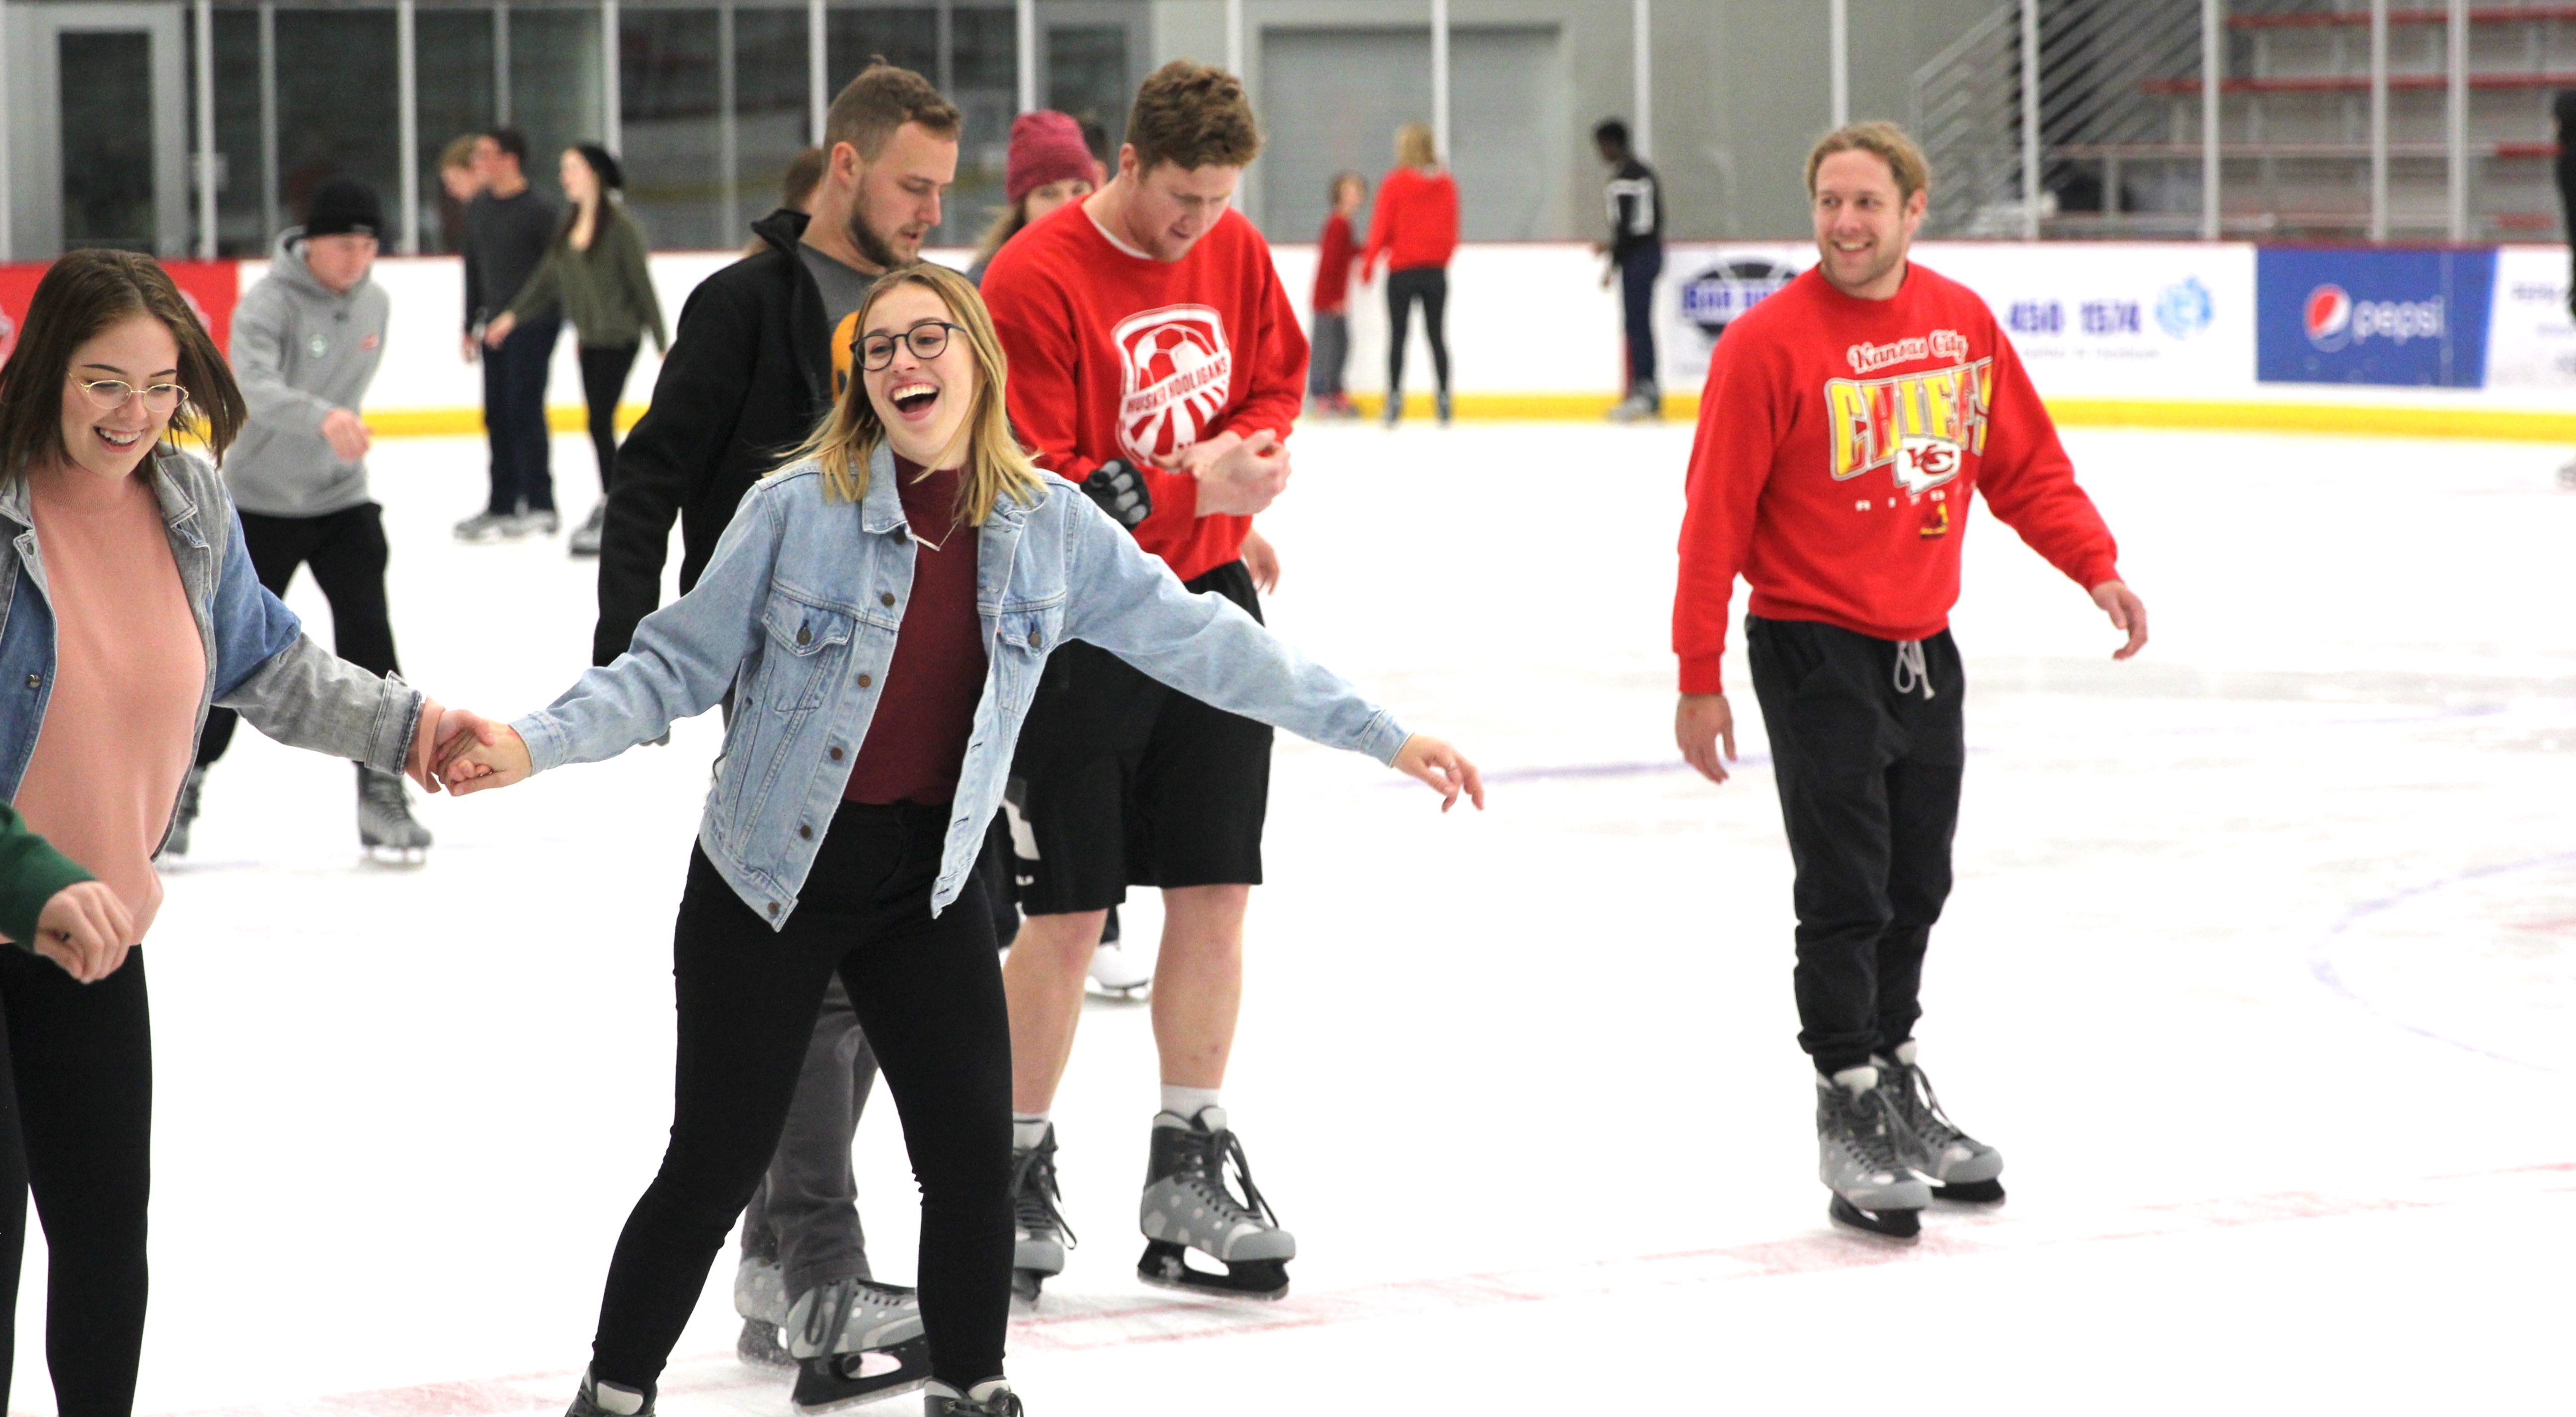 Free Skate Nights are free for any university student with their N-Card and $6 per person for the general public.